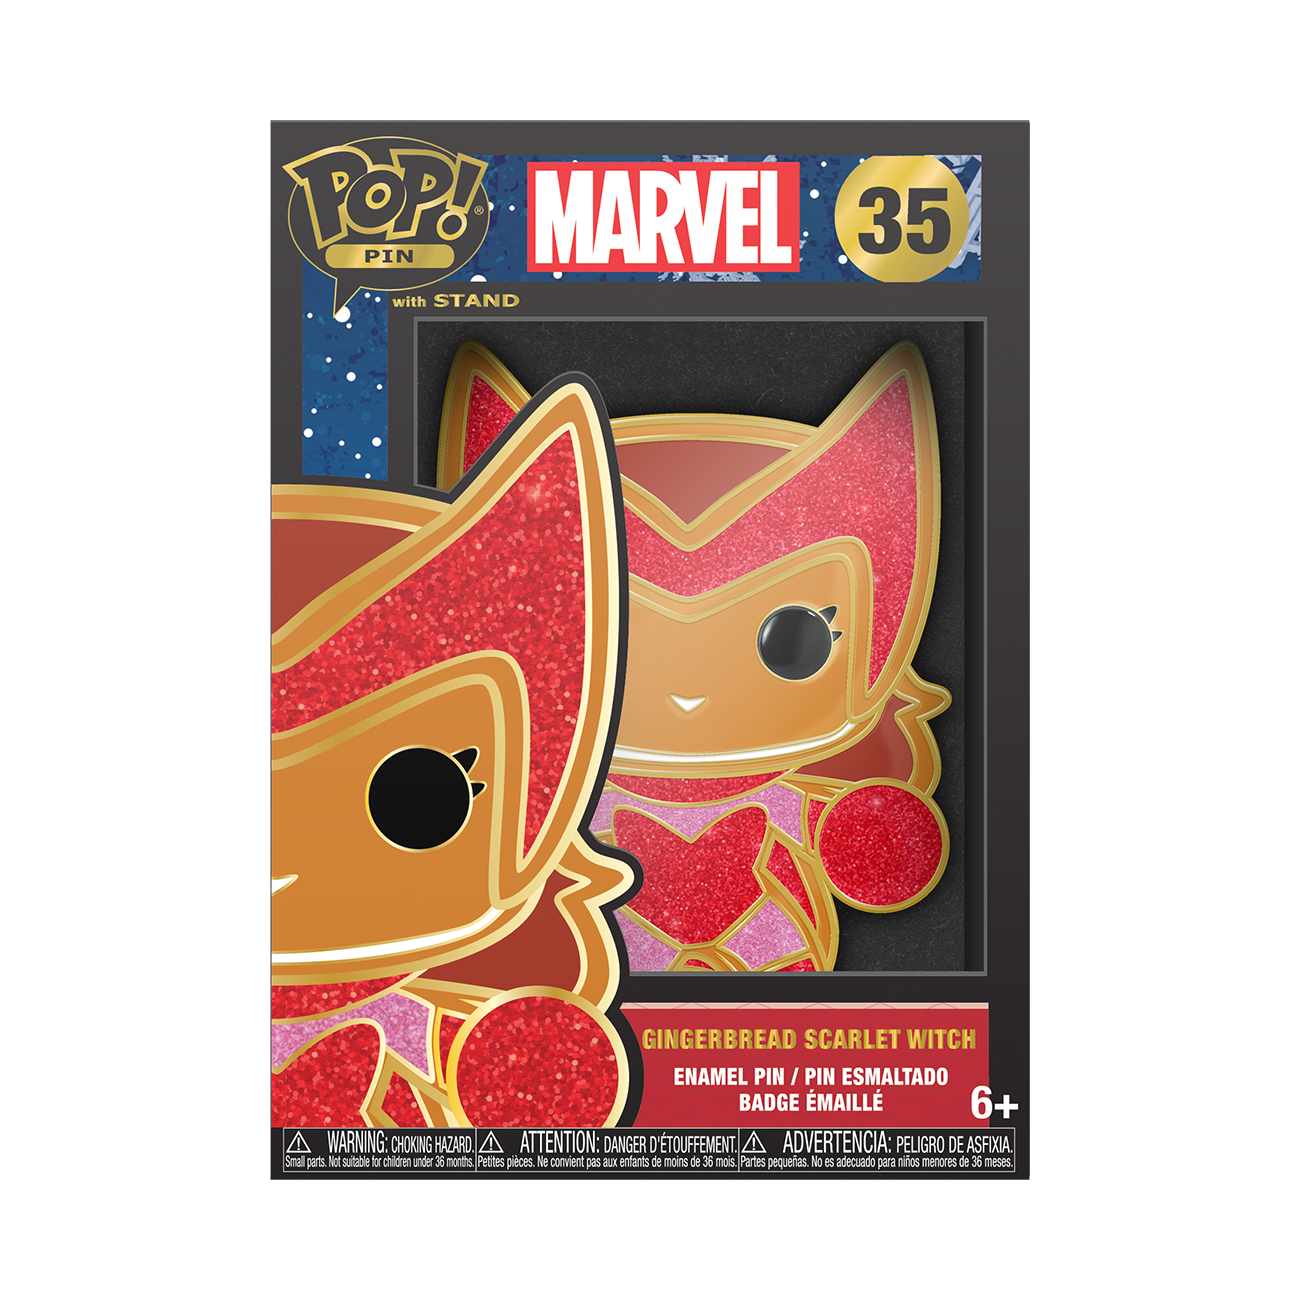 GINGERBREAD SCARLET WITCH POP! PIN - MARVEL